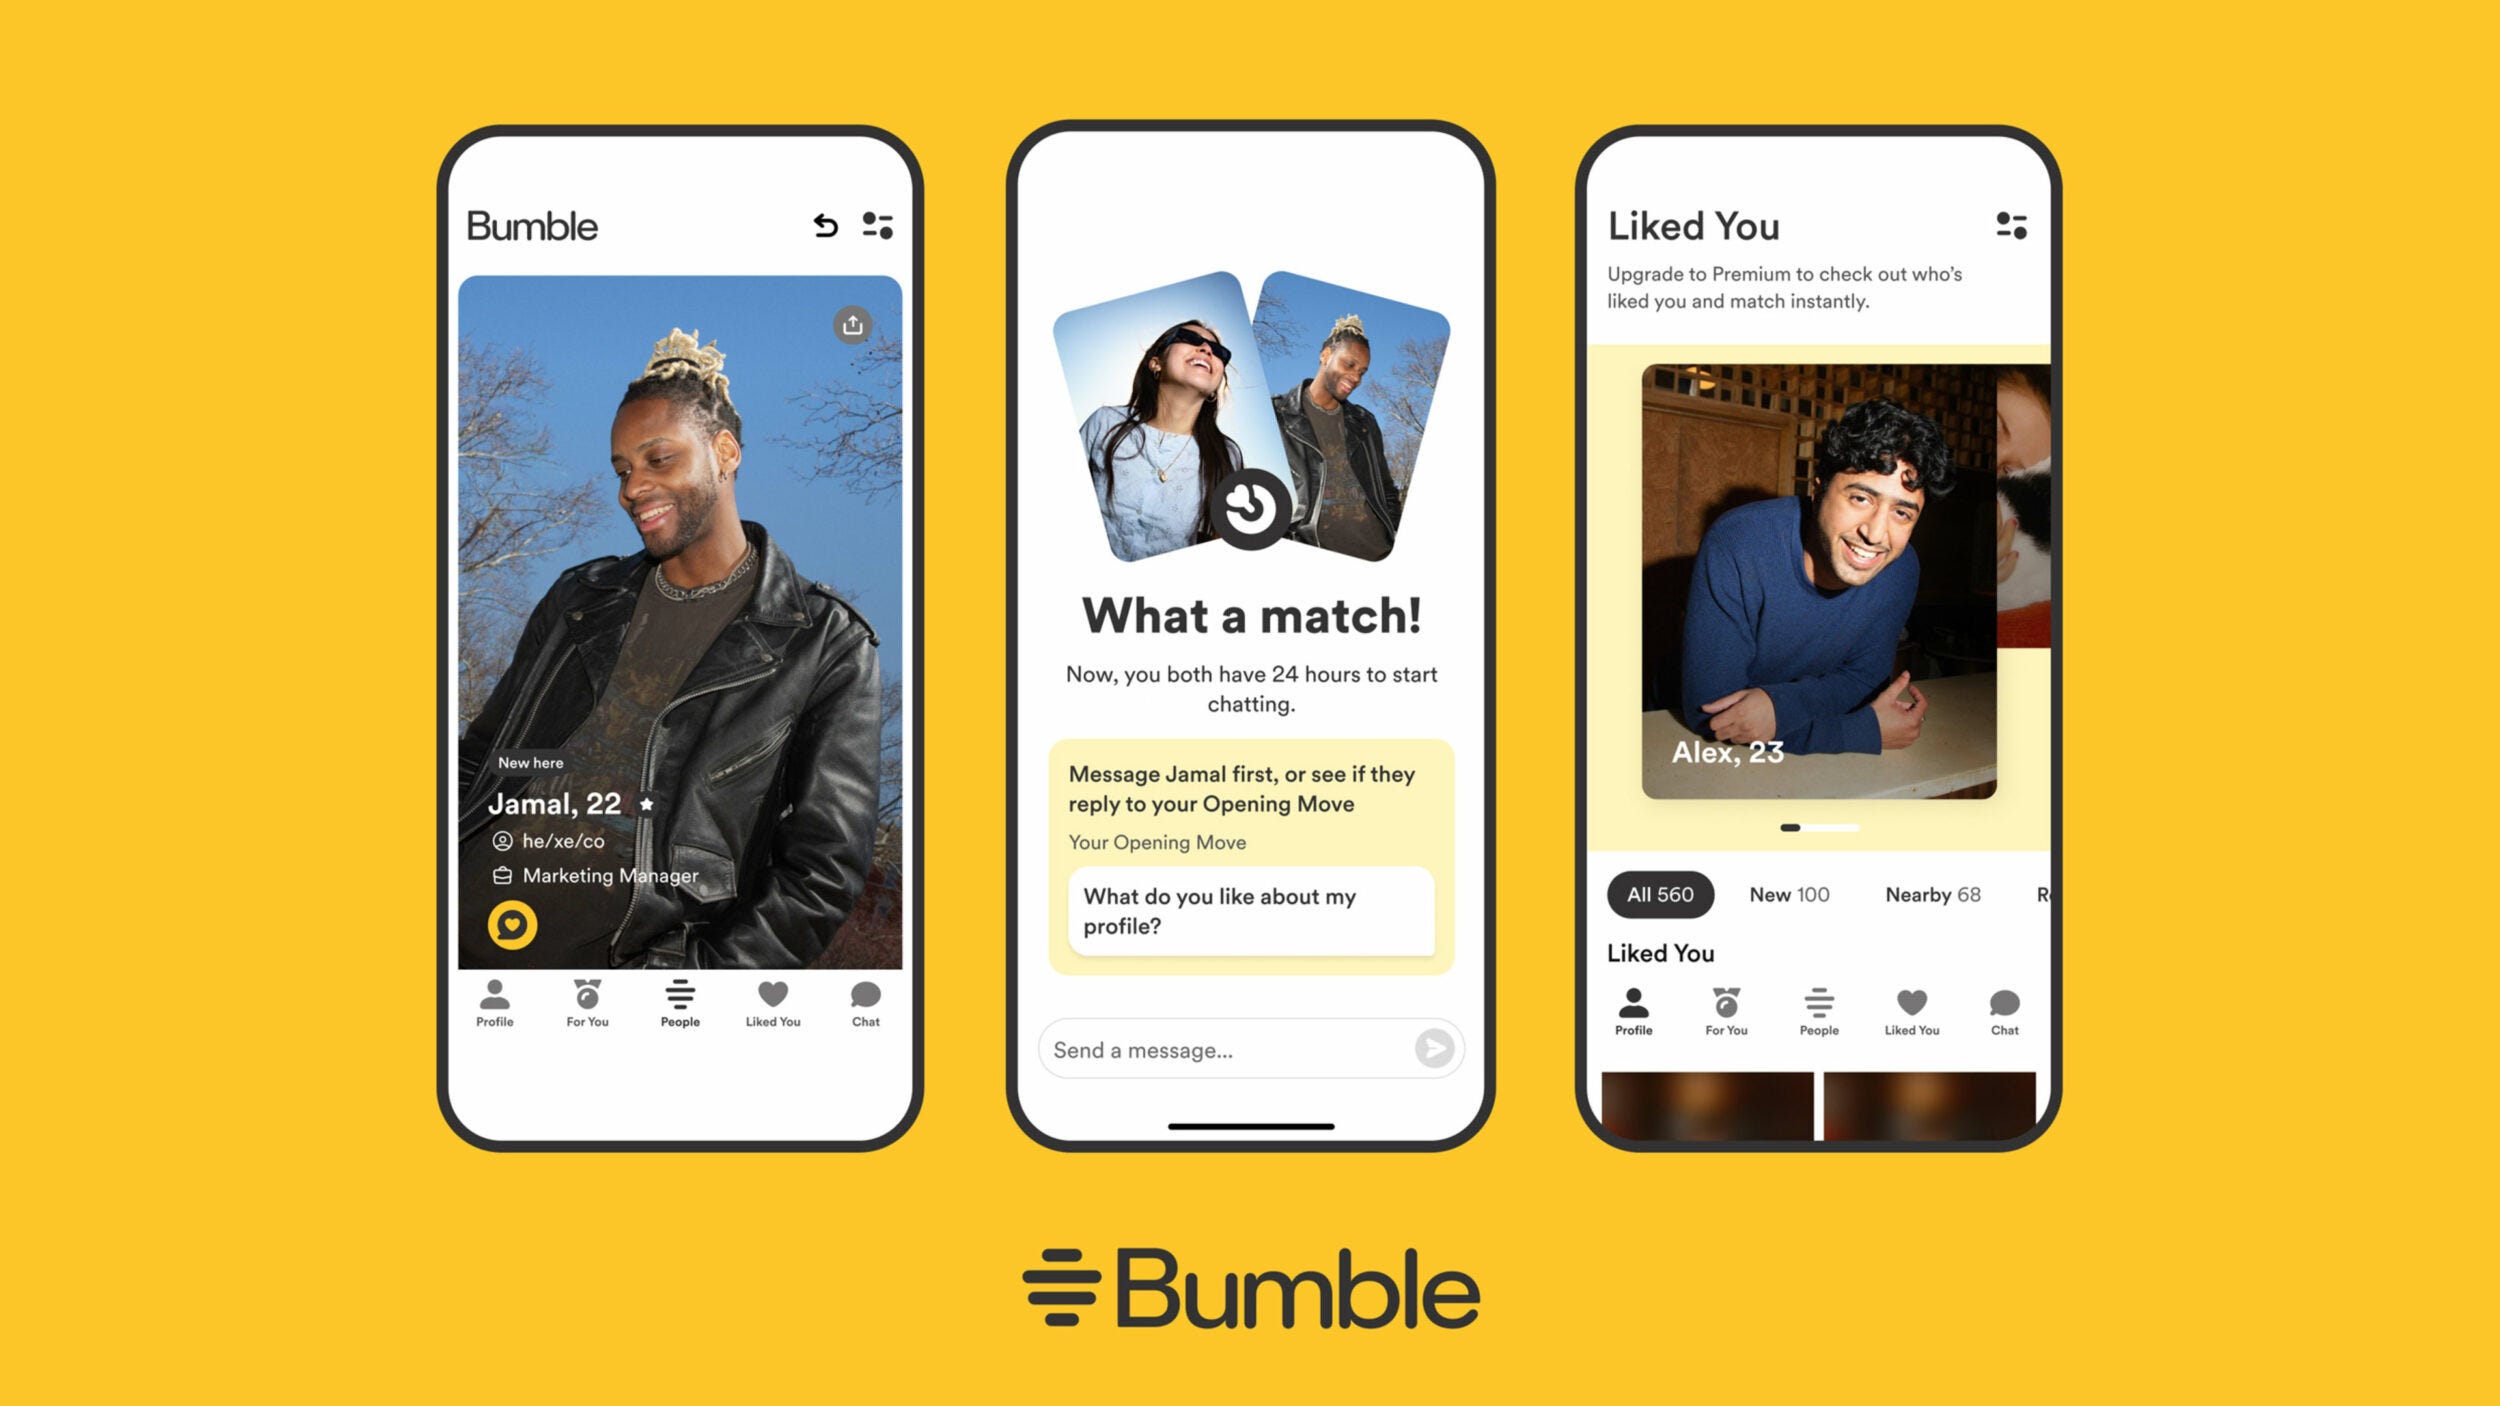 Triptych image of Bumble dating app displayed on mobile phone